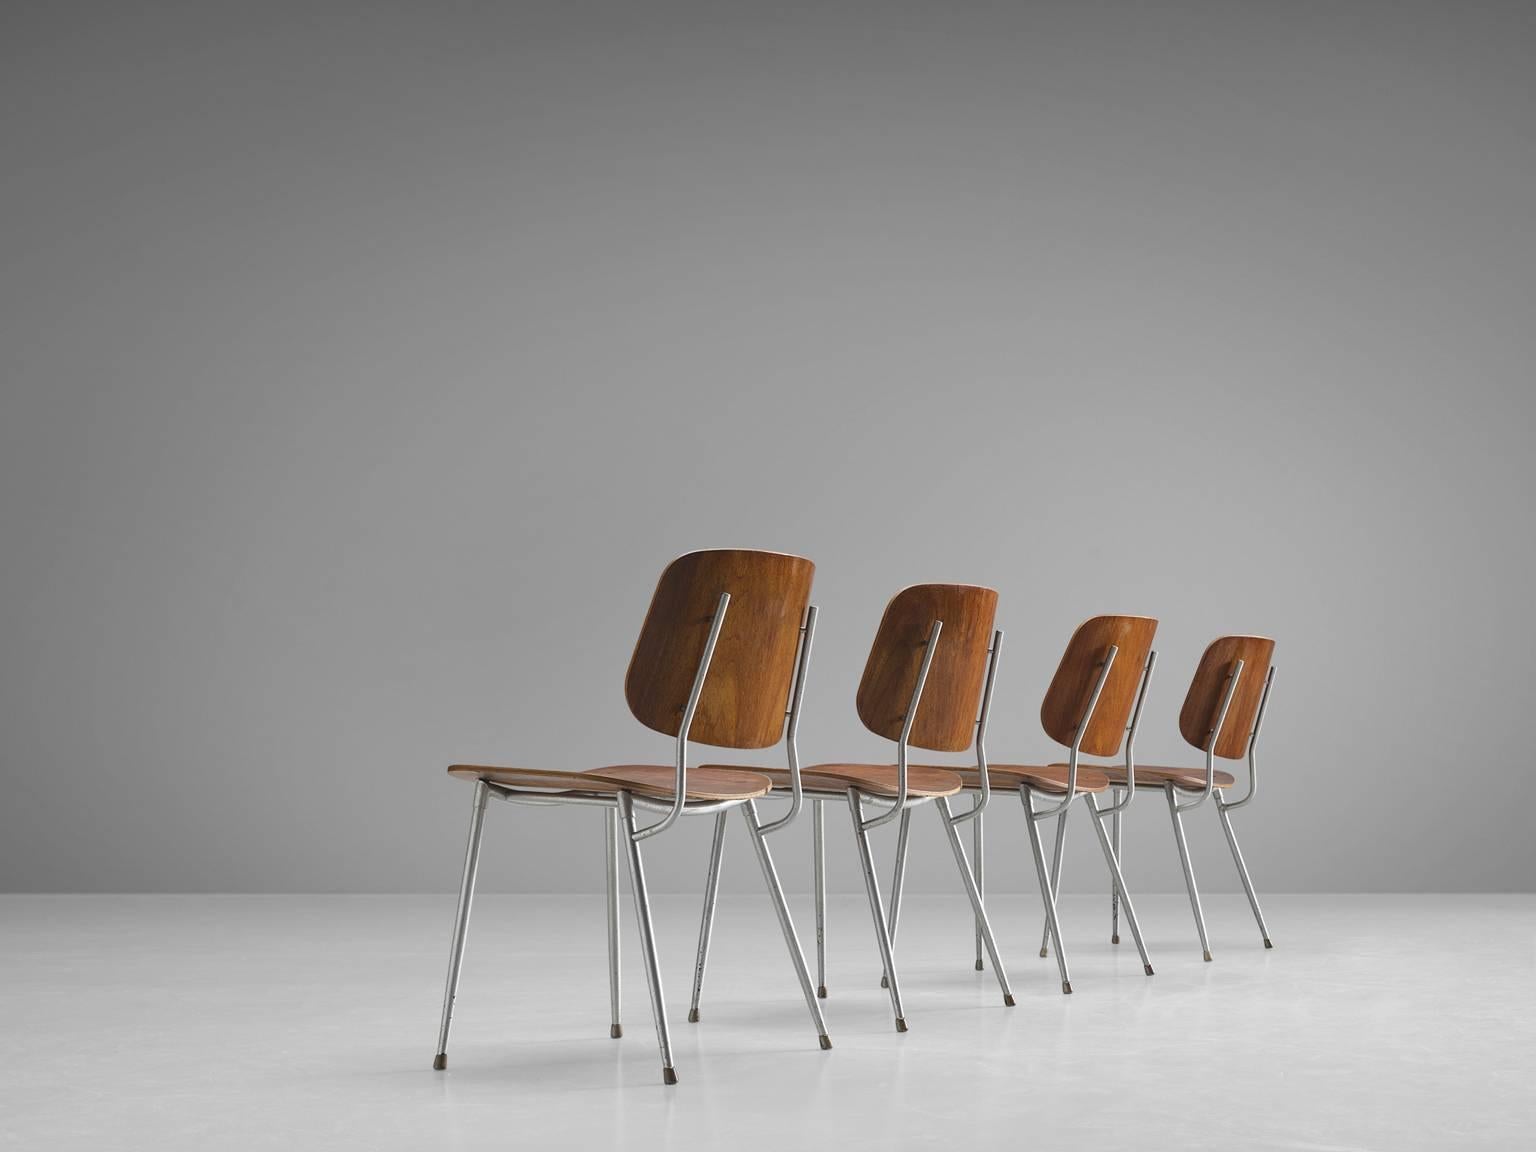 Dining chairs by Børge Mogensen for Søborg Furniture, teak, steel, Denmark, 1953

This set of four Søborg chairs feature a slender steel frame with molded teak seat and back. The chair consists of two wide and slightly curved shells, constituting